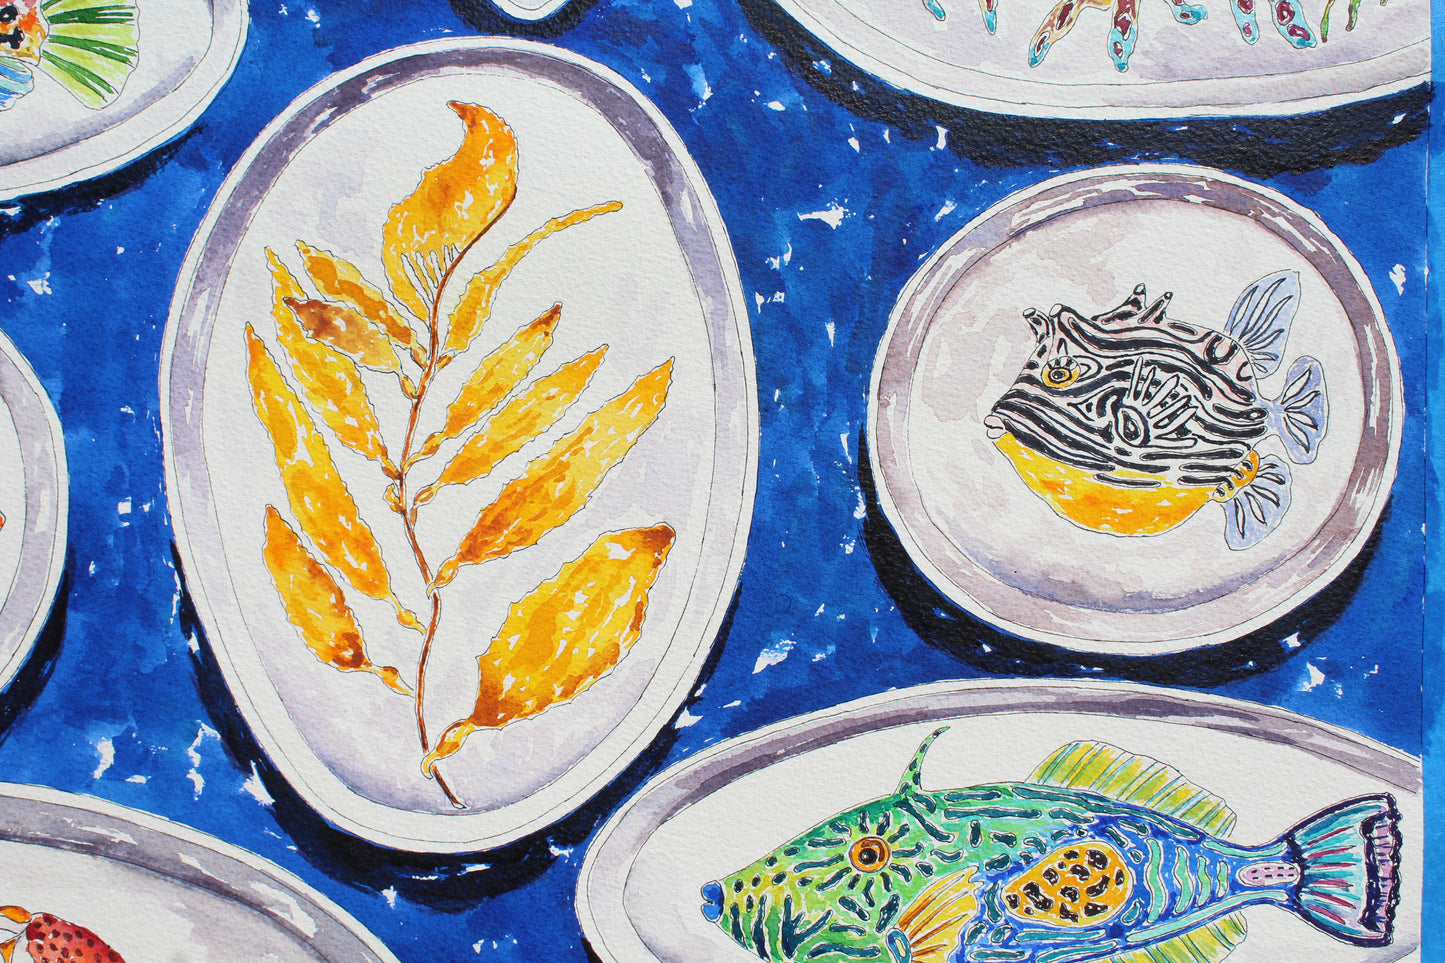 Ocean Delights, An Original 22" Square Watercolor And Ink Painting of Ceramics Decorated With Sea Life And Fish